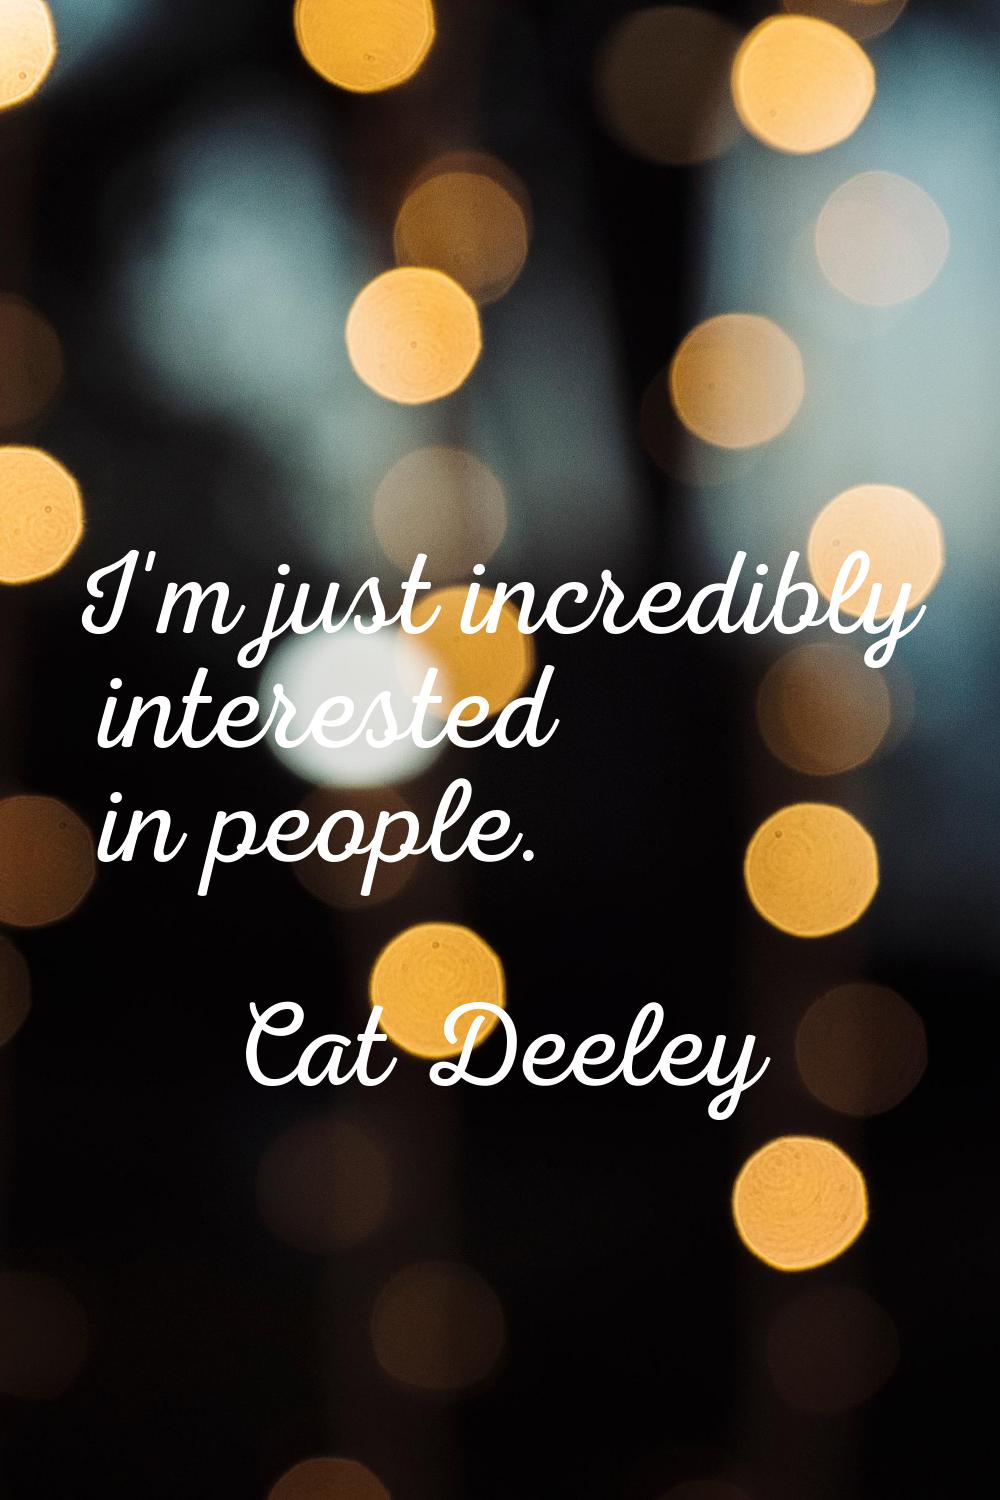 I'm just incredibly interested in people.